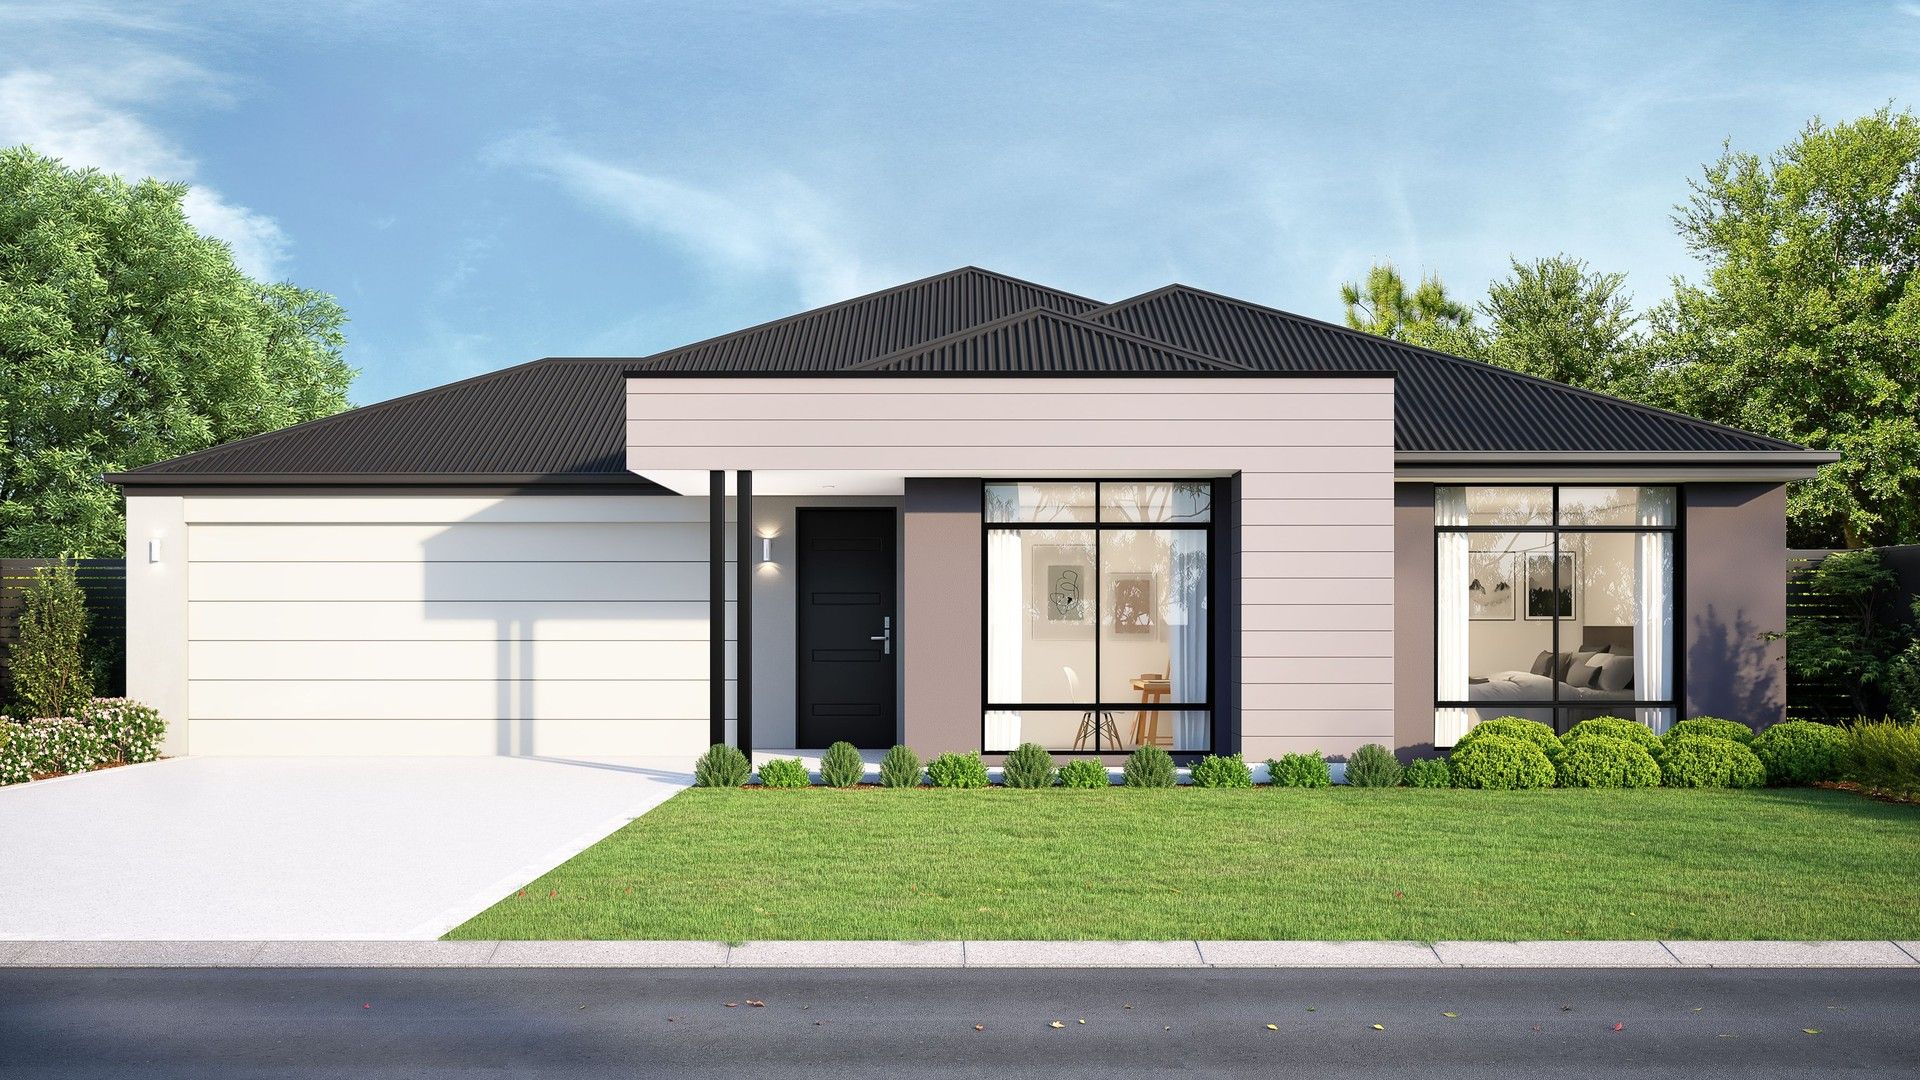 4 bedrooms New House & Land in 63 Homestead road GOSNELLS WA, 6110